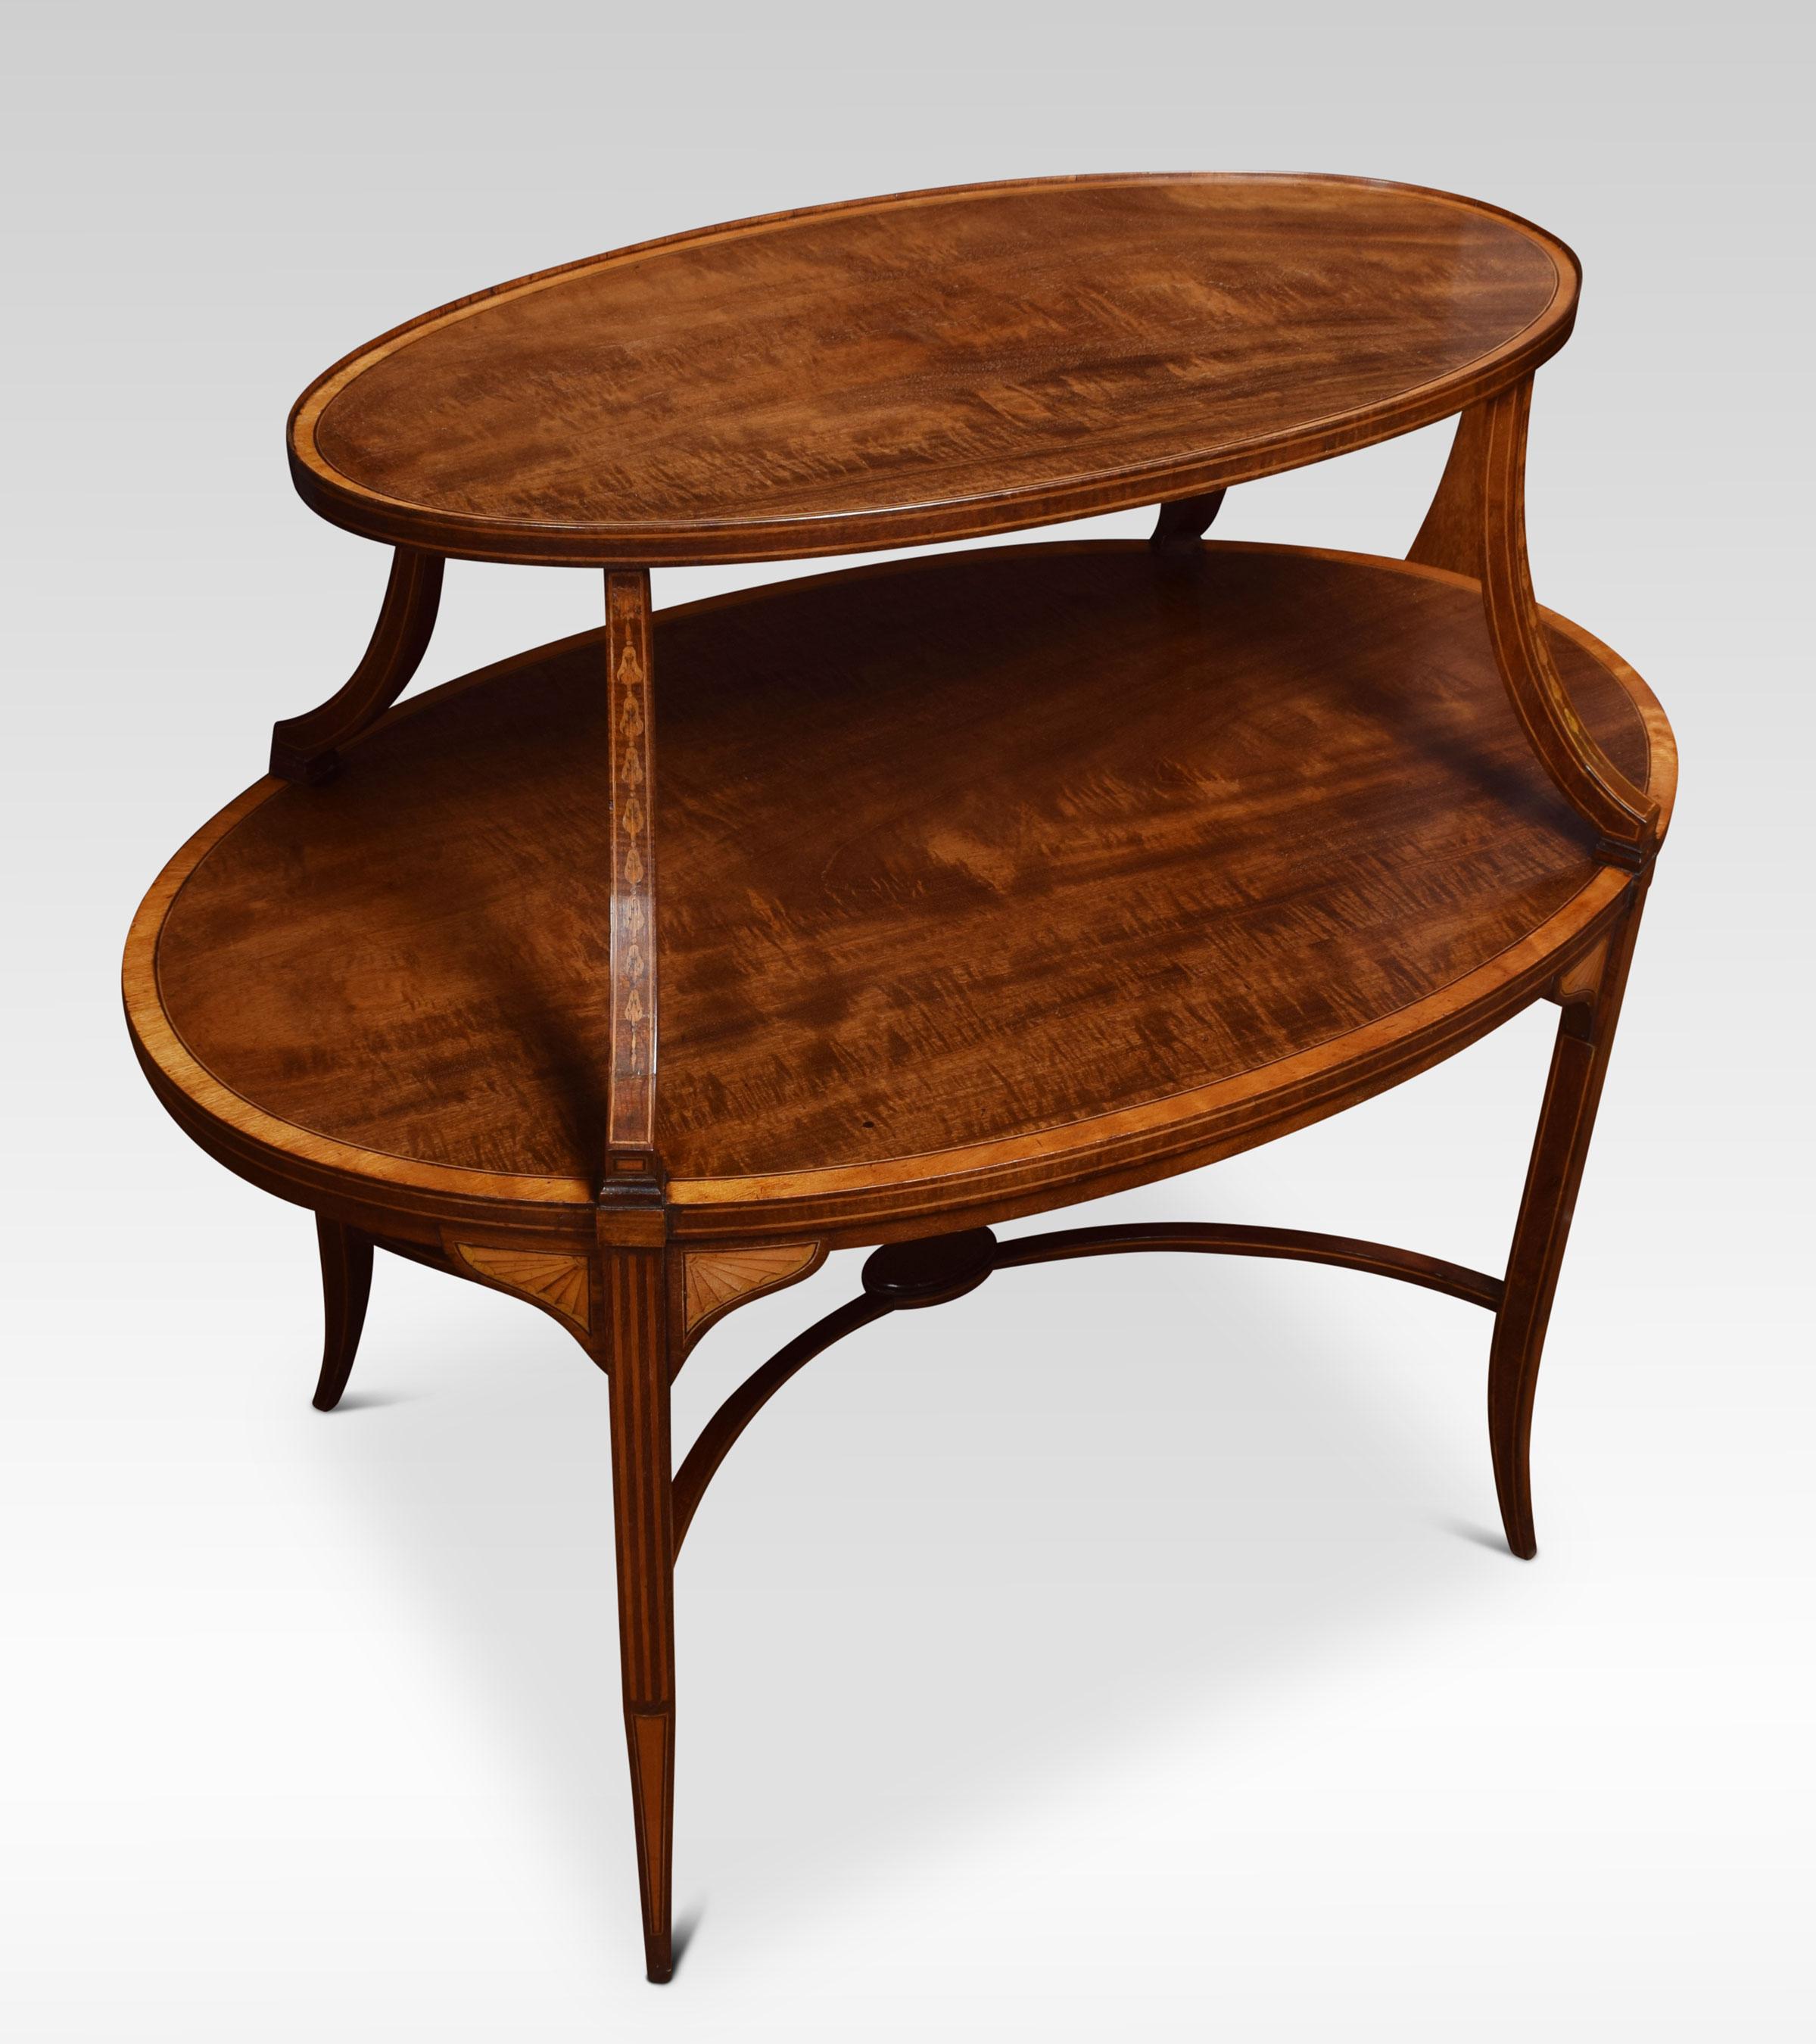 Mahogany and satinwood étagère, the top fitted with a removable oval glass-paneled tray, above under tier raised up on square block tapered and splayed legs, united by curved stretchers.
Dimensions:
Height 33 inches
Width 35 inches
Depth 22